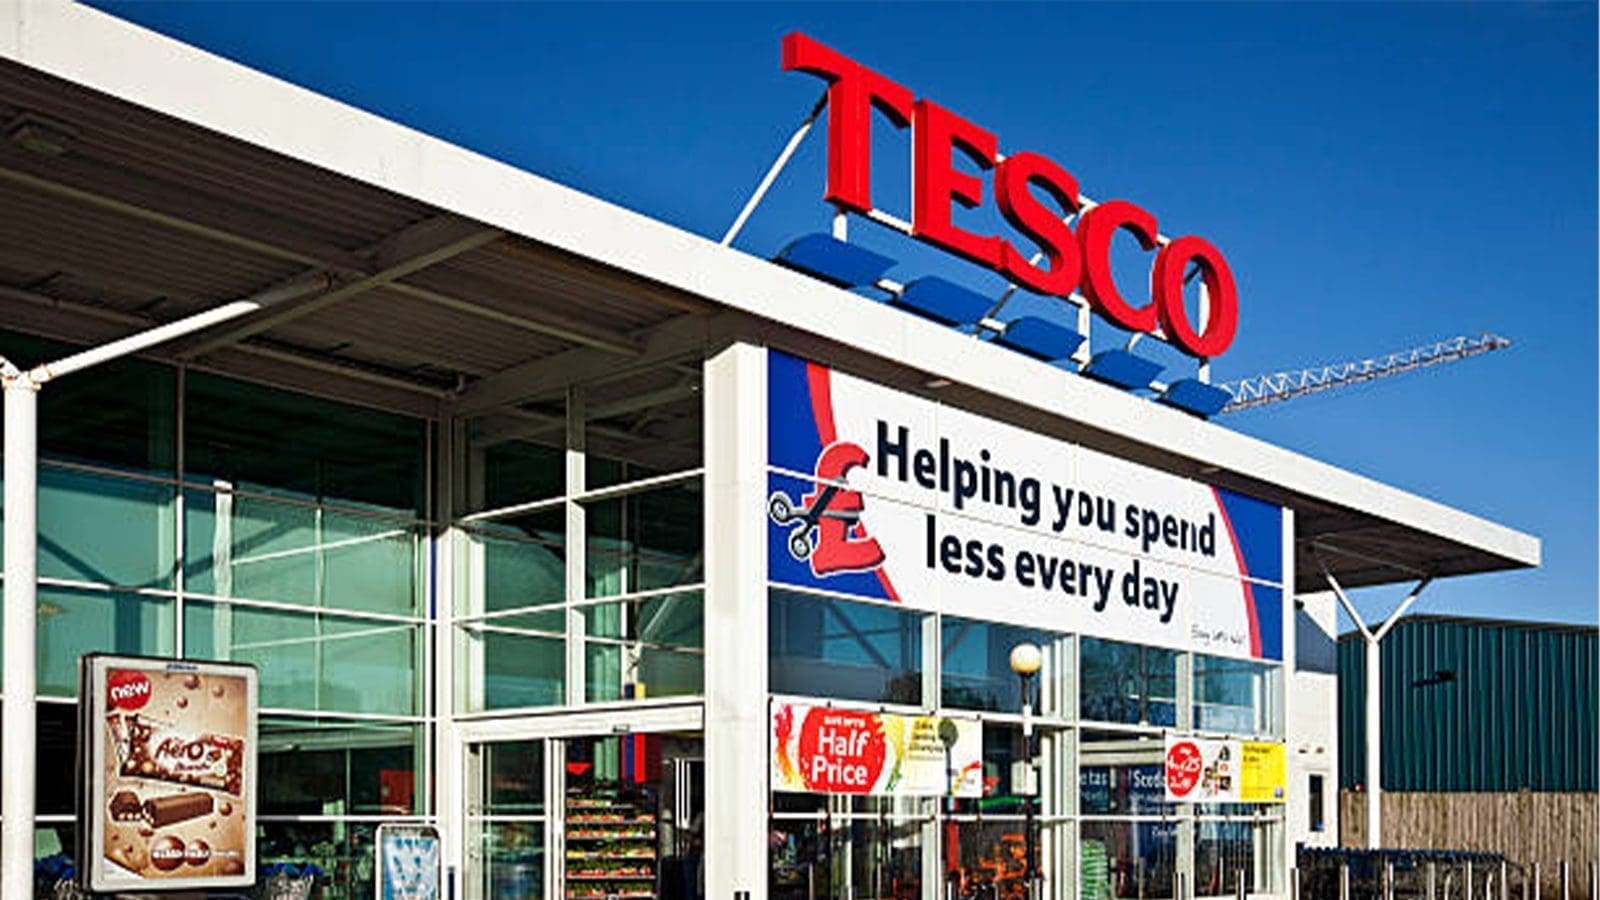 Tesco’s report shows shift towards healthier eating habits